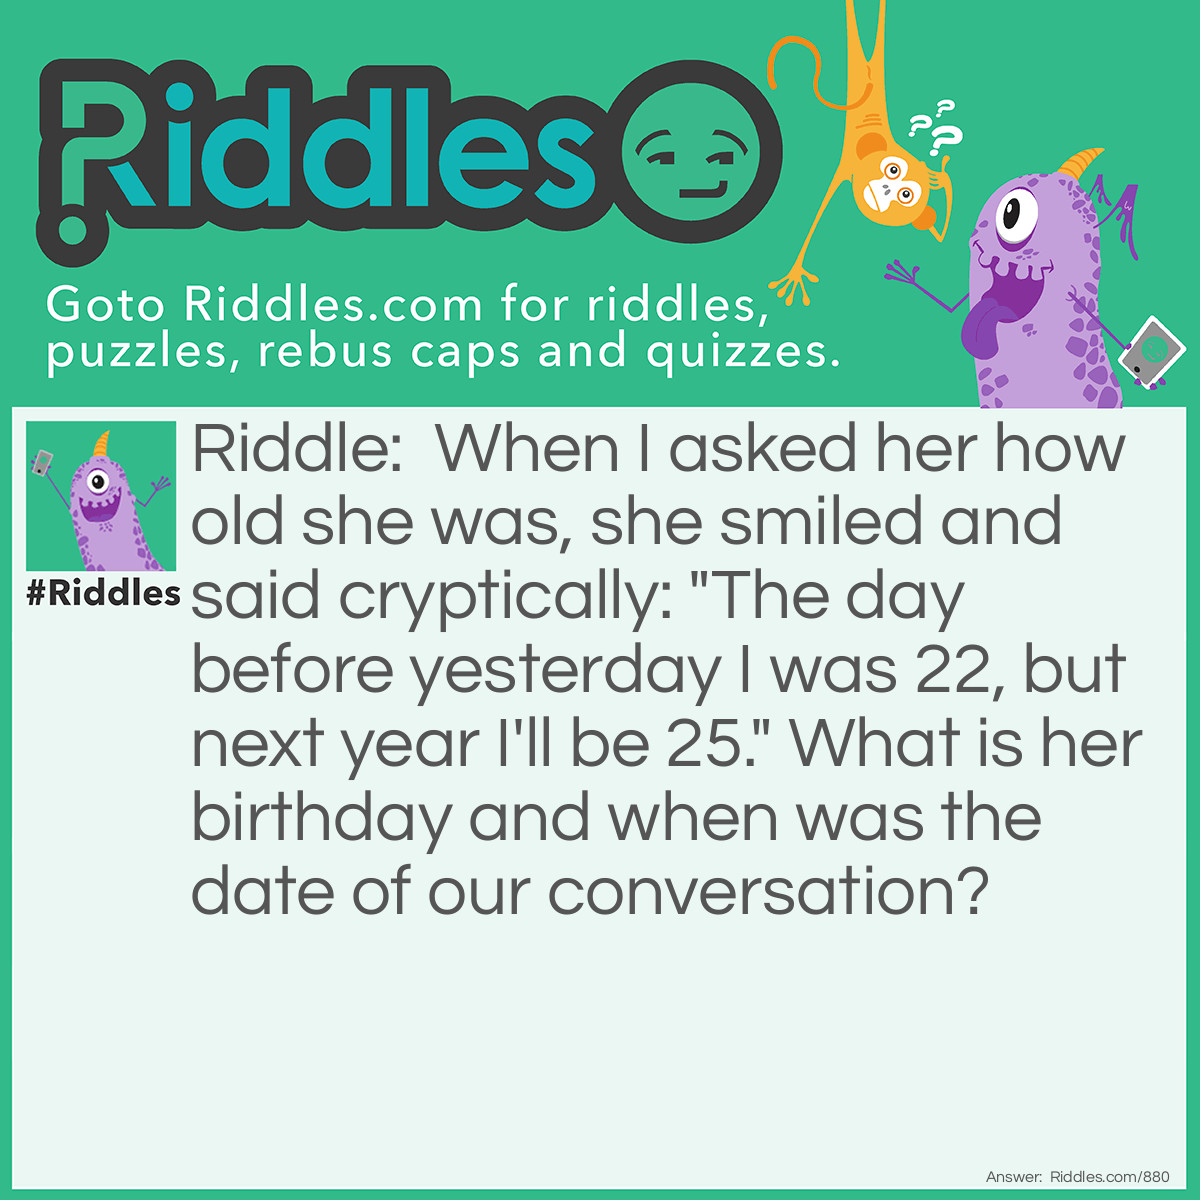 Riddle: When I asked her how old she was, she smiled and said cryptically: "The day before yesterday I was 22, but next year I'll be 25." What is her birthday and when was the date of our conversation? Answer: We conversed on January 1 and her birthday was on December 31. So, the day before yesterday on Dec. 30th she was 22 and he turned 23 on Dec. 31. So her next birthday, when she turns 24, would be Dec. 31 of the same year the question was asked.  However, next years birthday would be the following year on Dec. 31, when she would be 25.